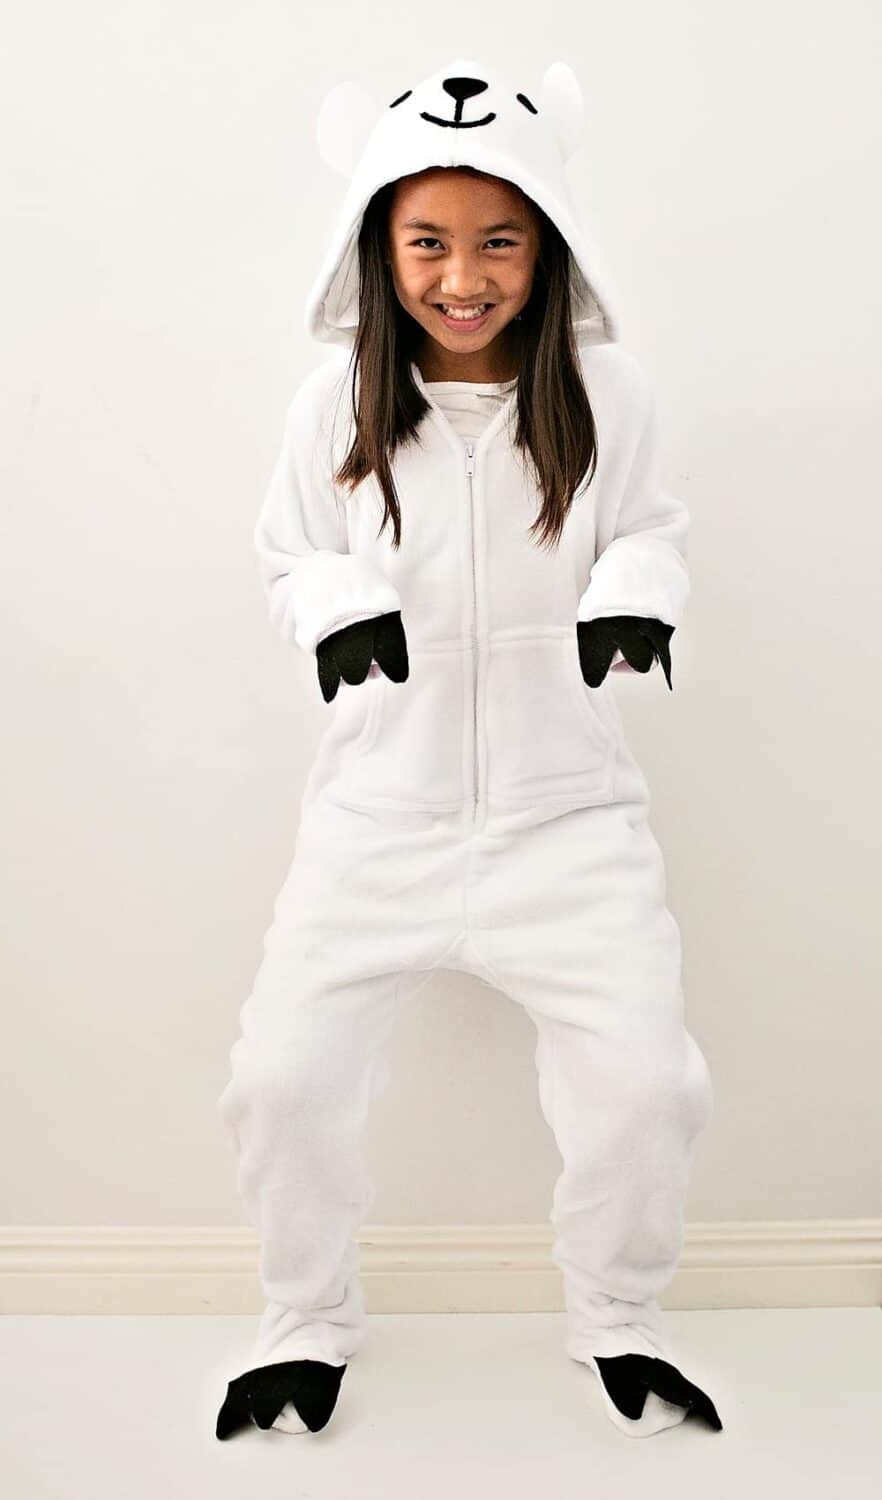 A smiling girl stands wearing a homemade polar bear Halloween costume consisting of white onesie pajamas with black felt paw details attached to each foot and each hand along with white felt ears and black felt nose and eyes attached to the hood.